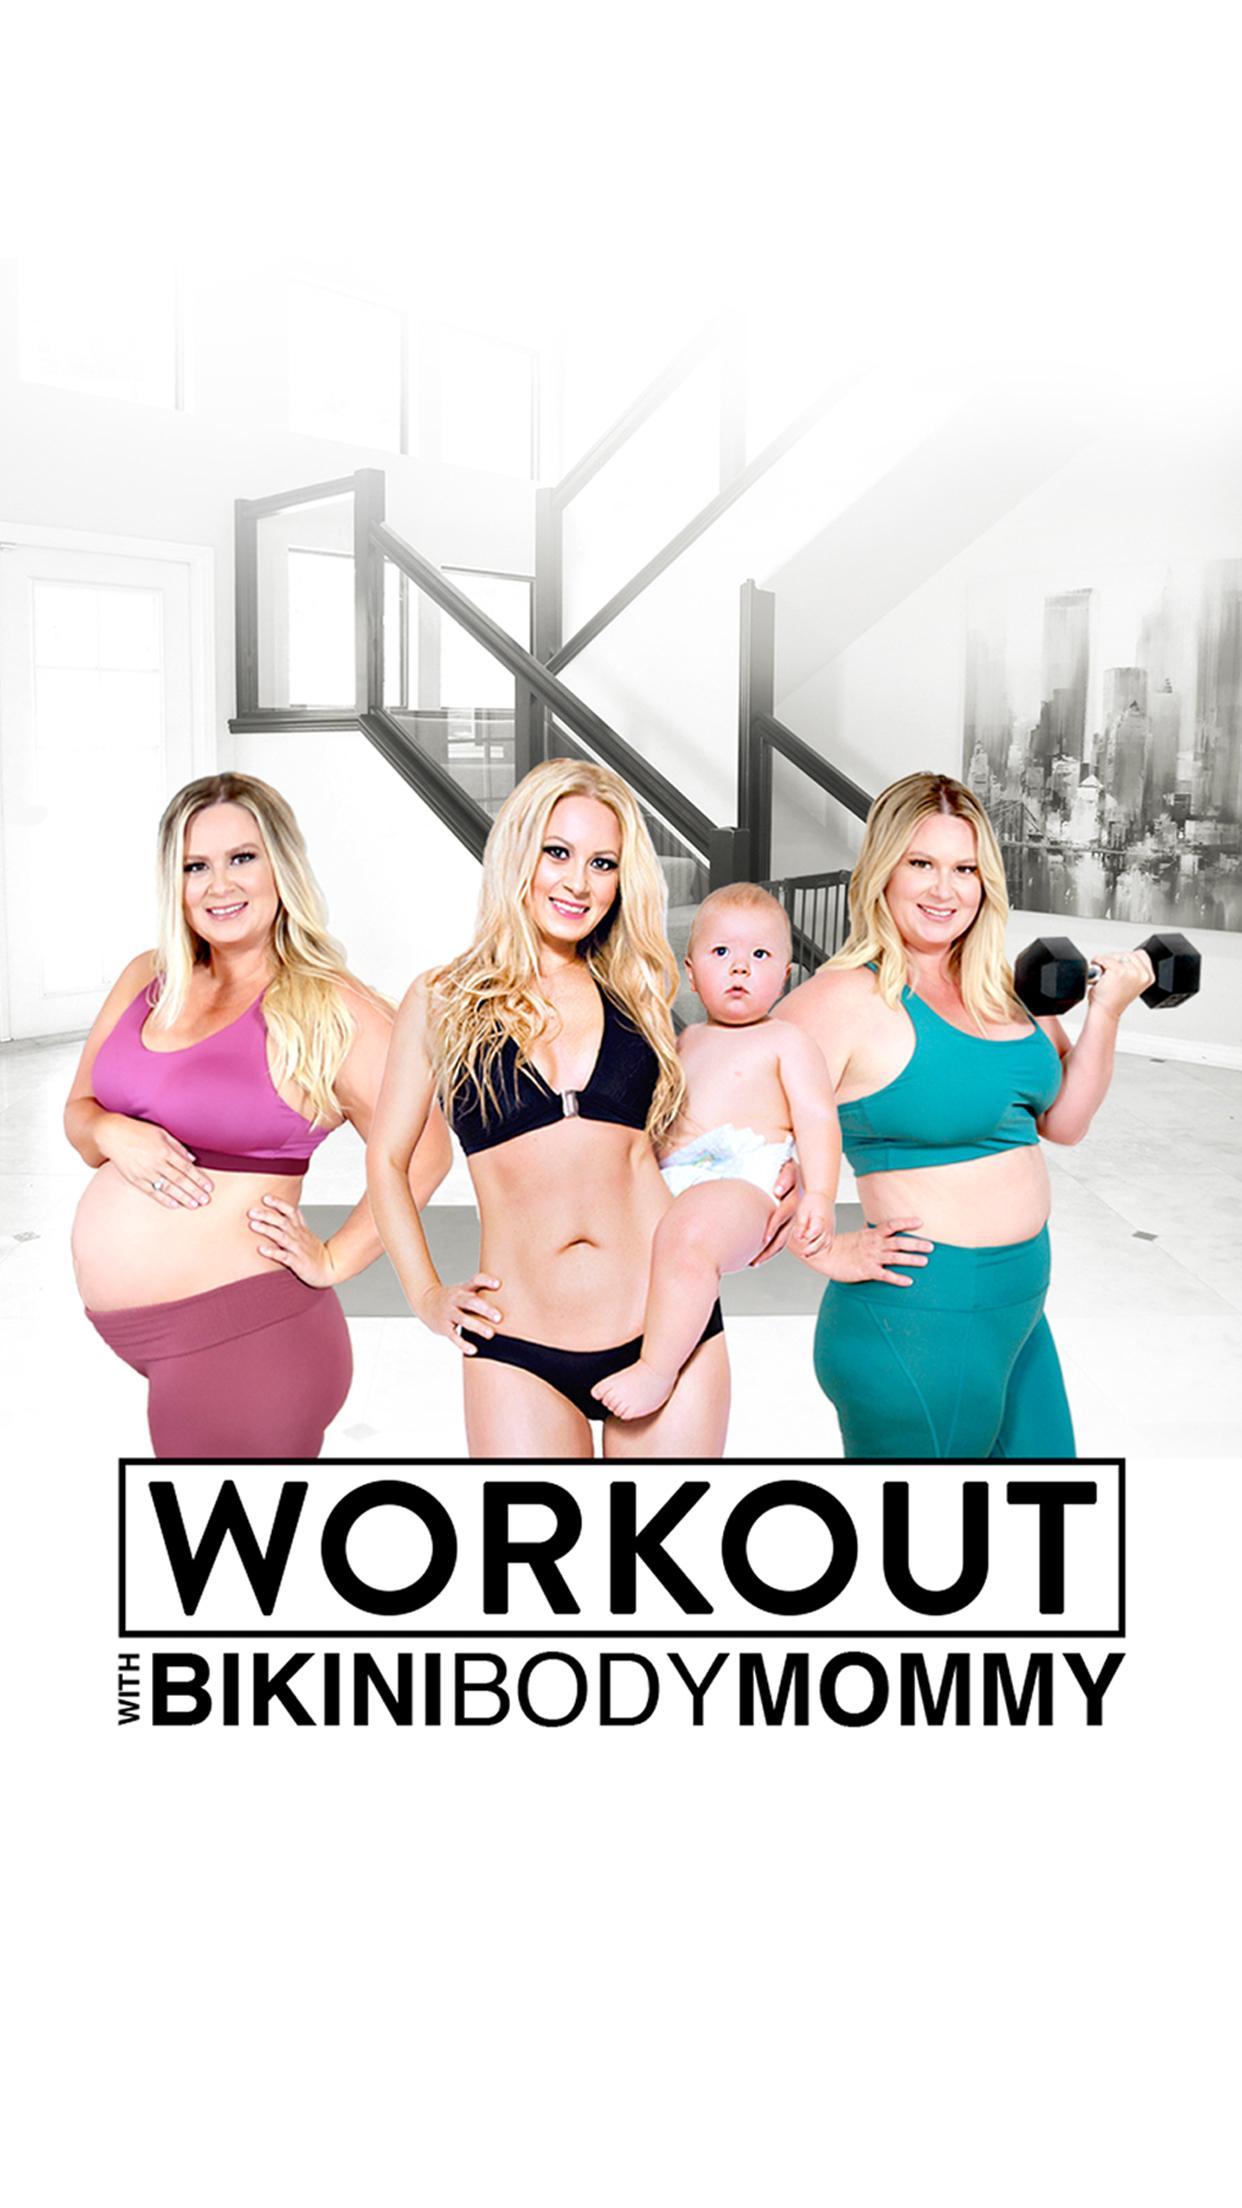 WORKOUT with Bikini Body Mommy for Android - APK Download